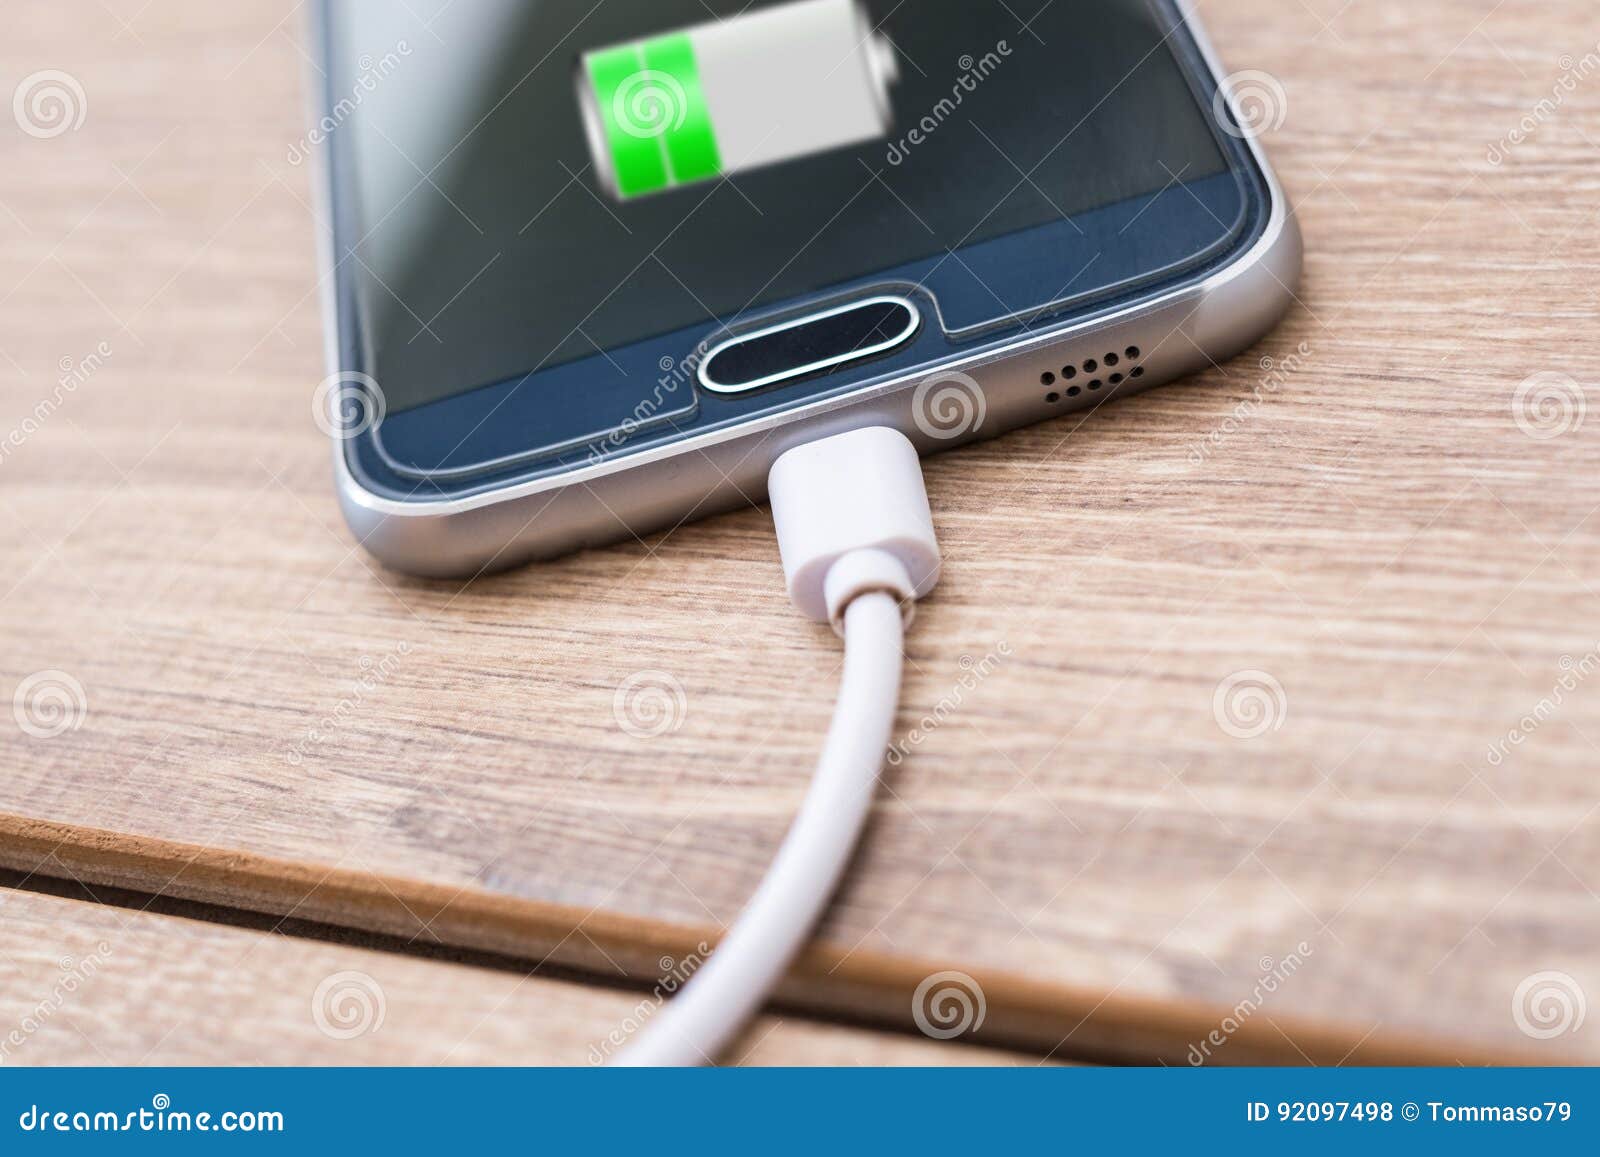 mobile phone and battery charger cable on office desk